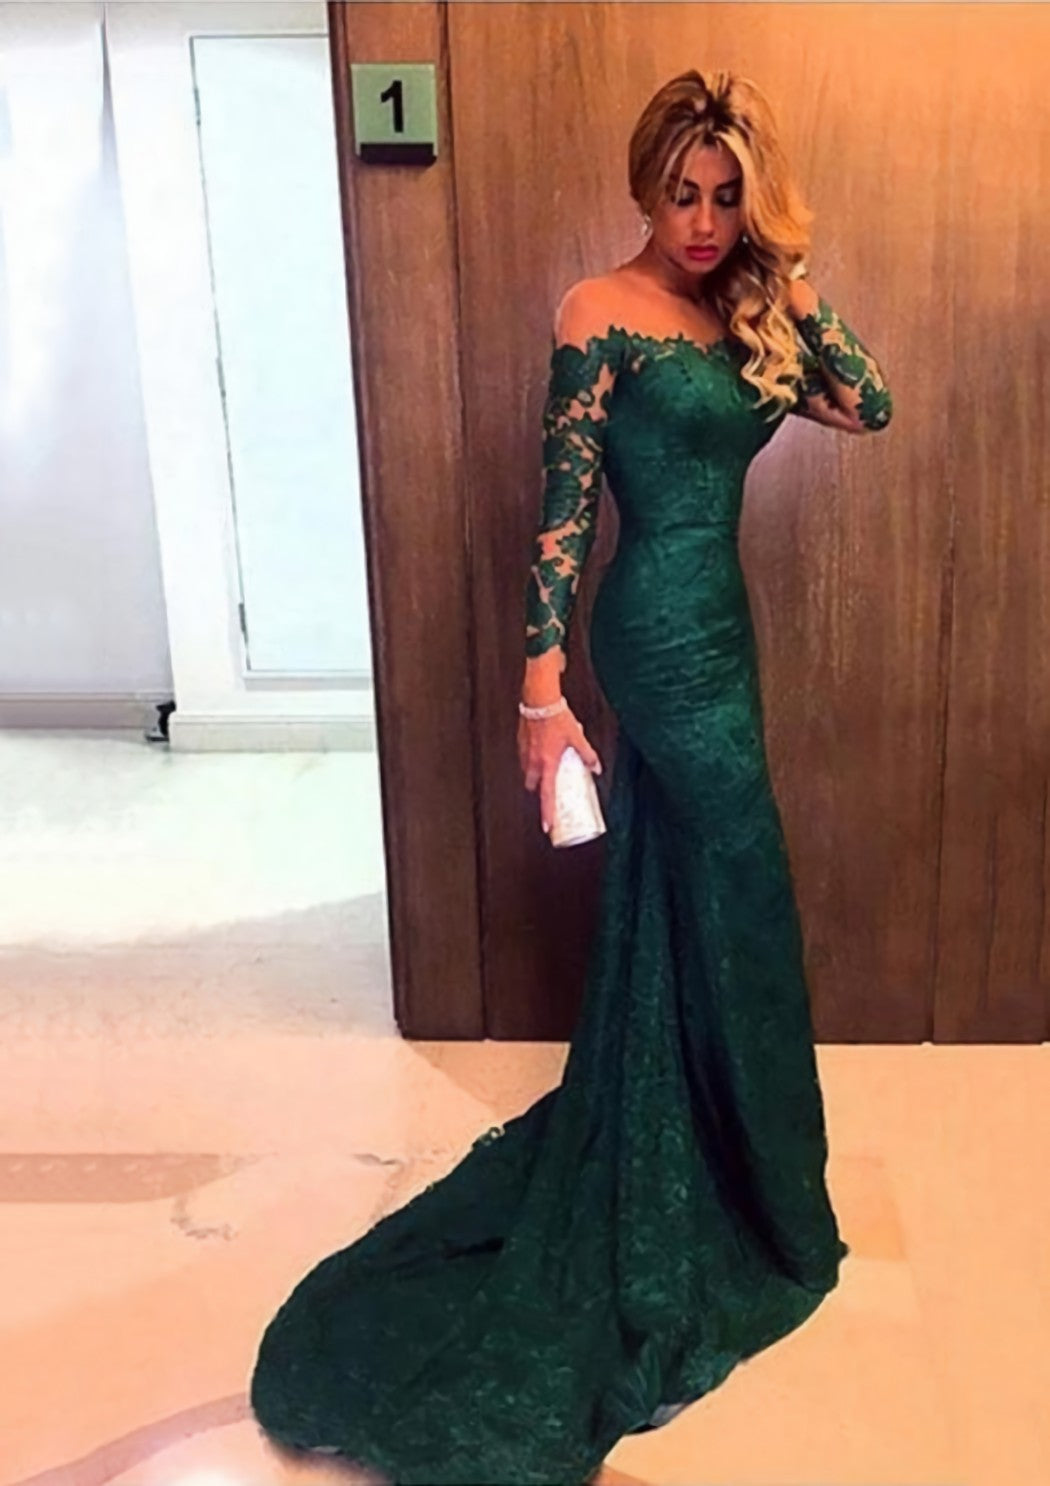 Trumpet Mermaid Full Long Sleeve Bateau Chapel Train Lace Prom Dress Outfits For Women With Appliqued